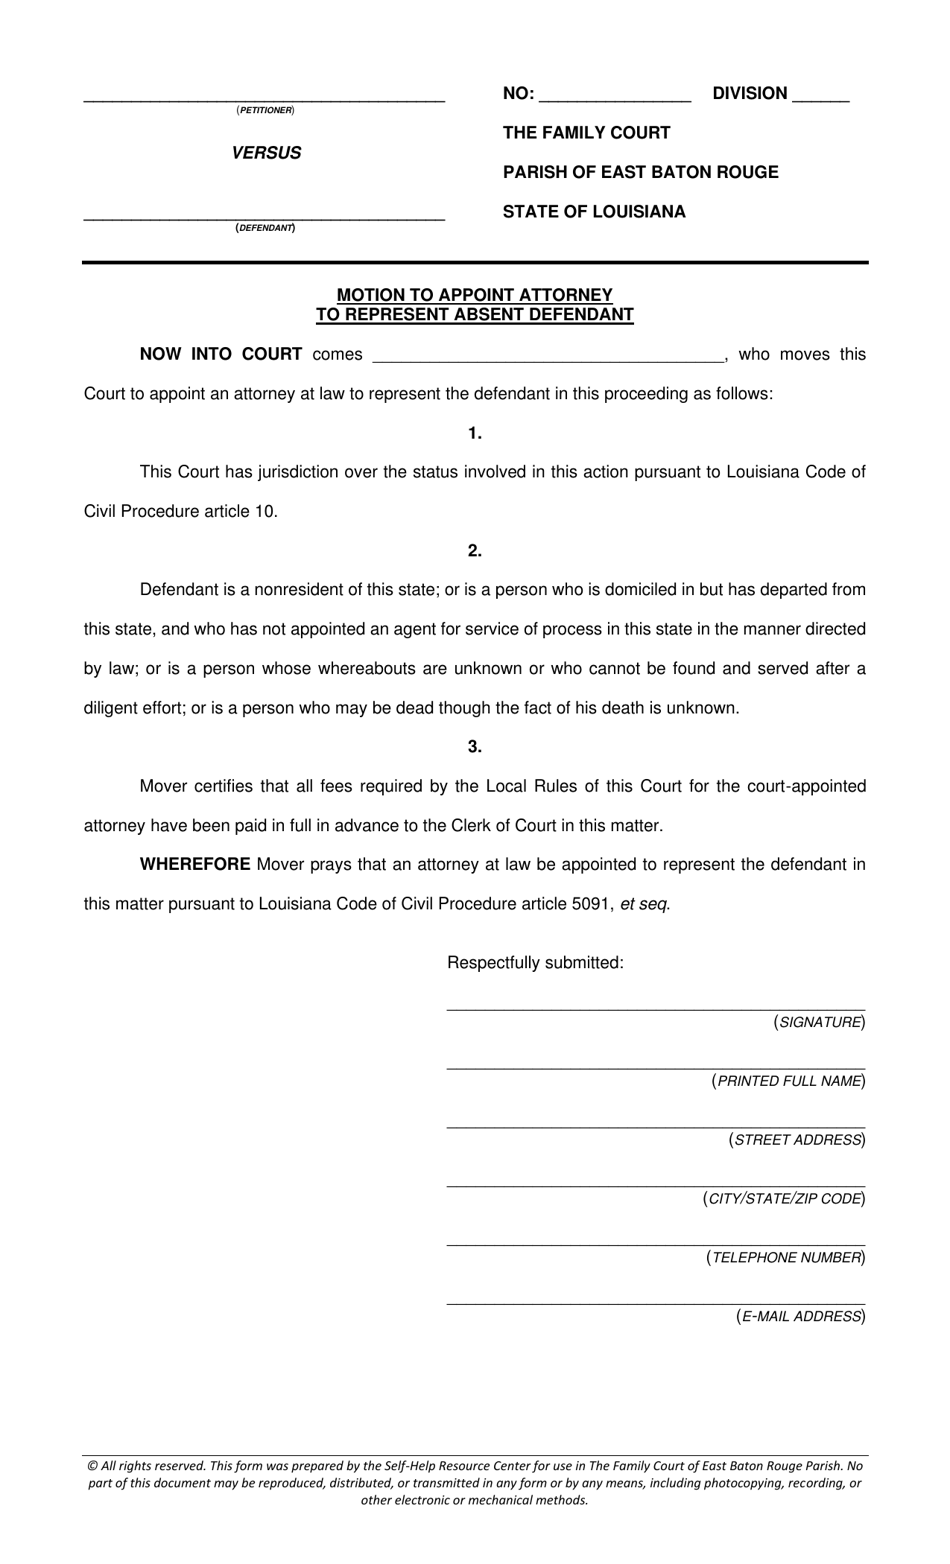 Motion to Appoint Attorney to Represent Absent Defendant - Parish of East Baton Rouge, Louisiana, Page 1